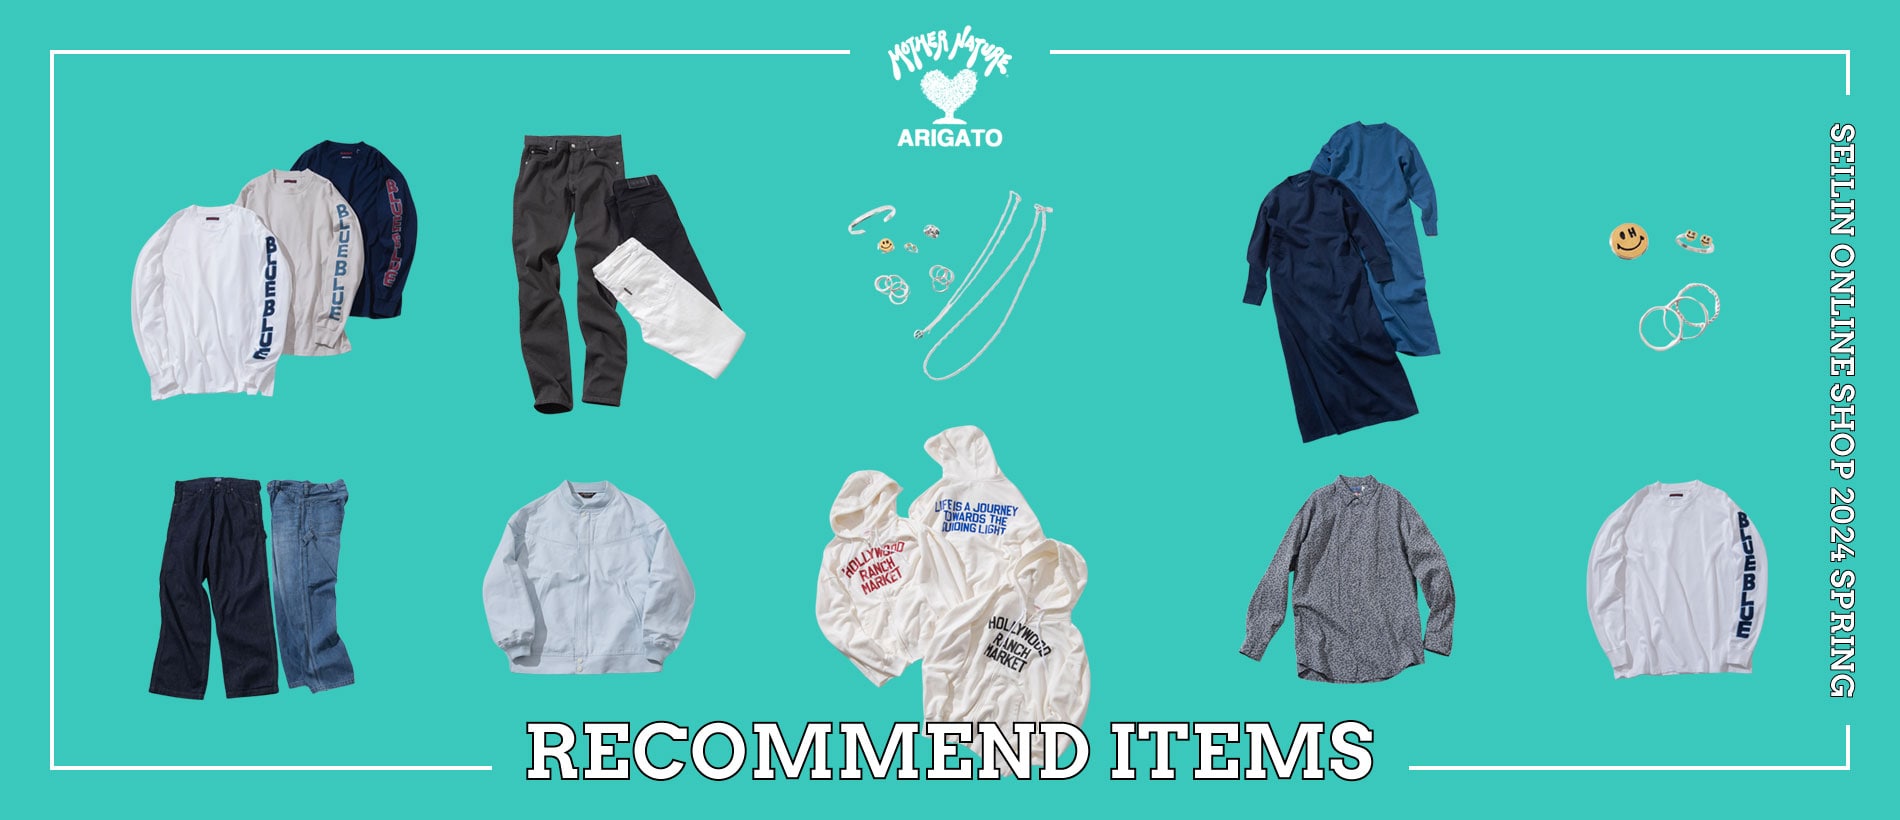 spring_recommend_items